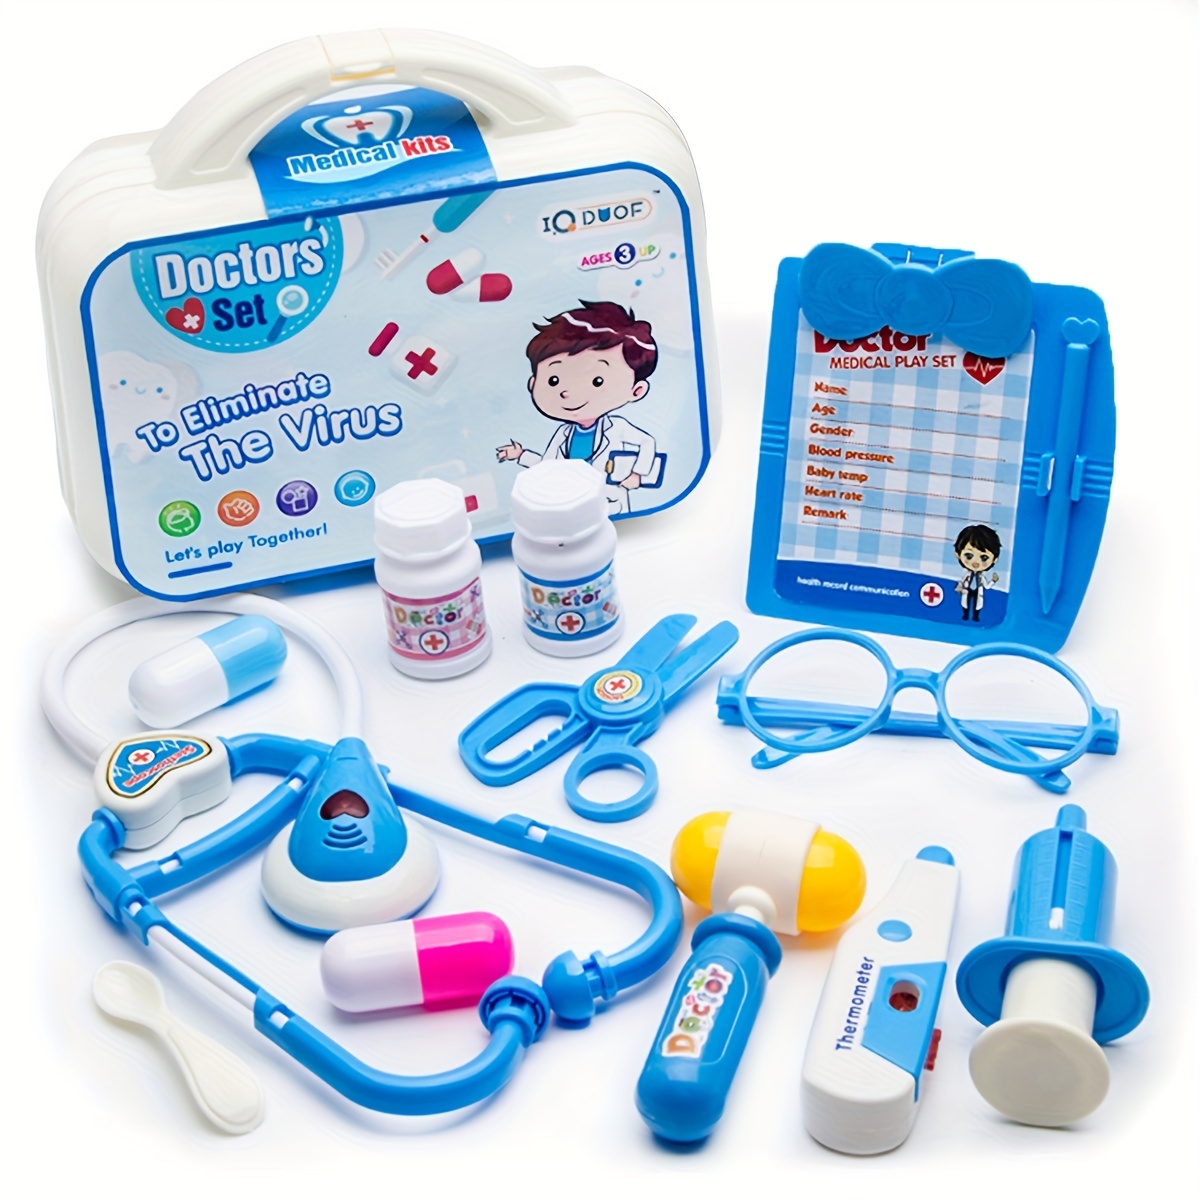  Doctor Playset Medical Kit Contains Children's Injections,  Lighted Play Stethoscope for Kids, Dentist kit for Kids 3-5 Pretend Play(30PCS)  (Blue Doctor kit) : Toys & Games